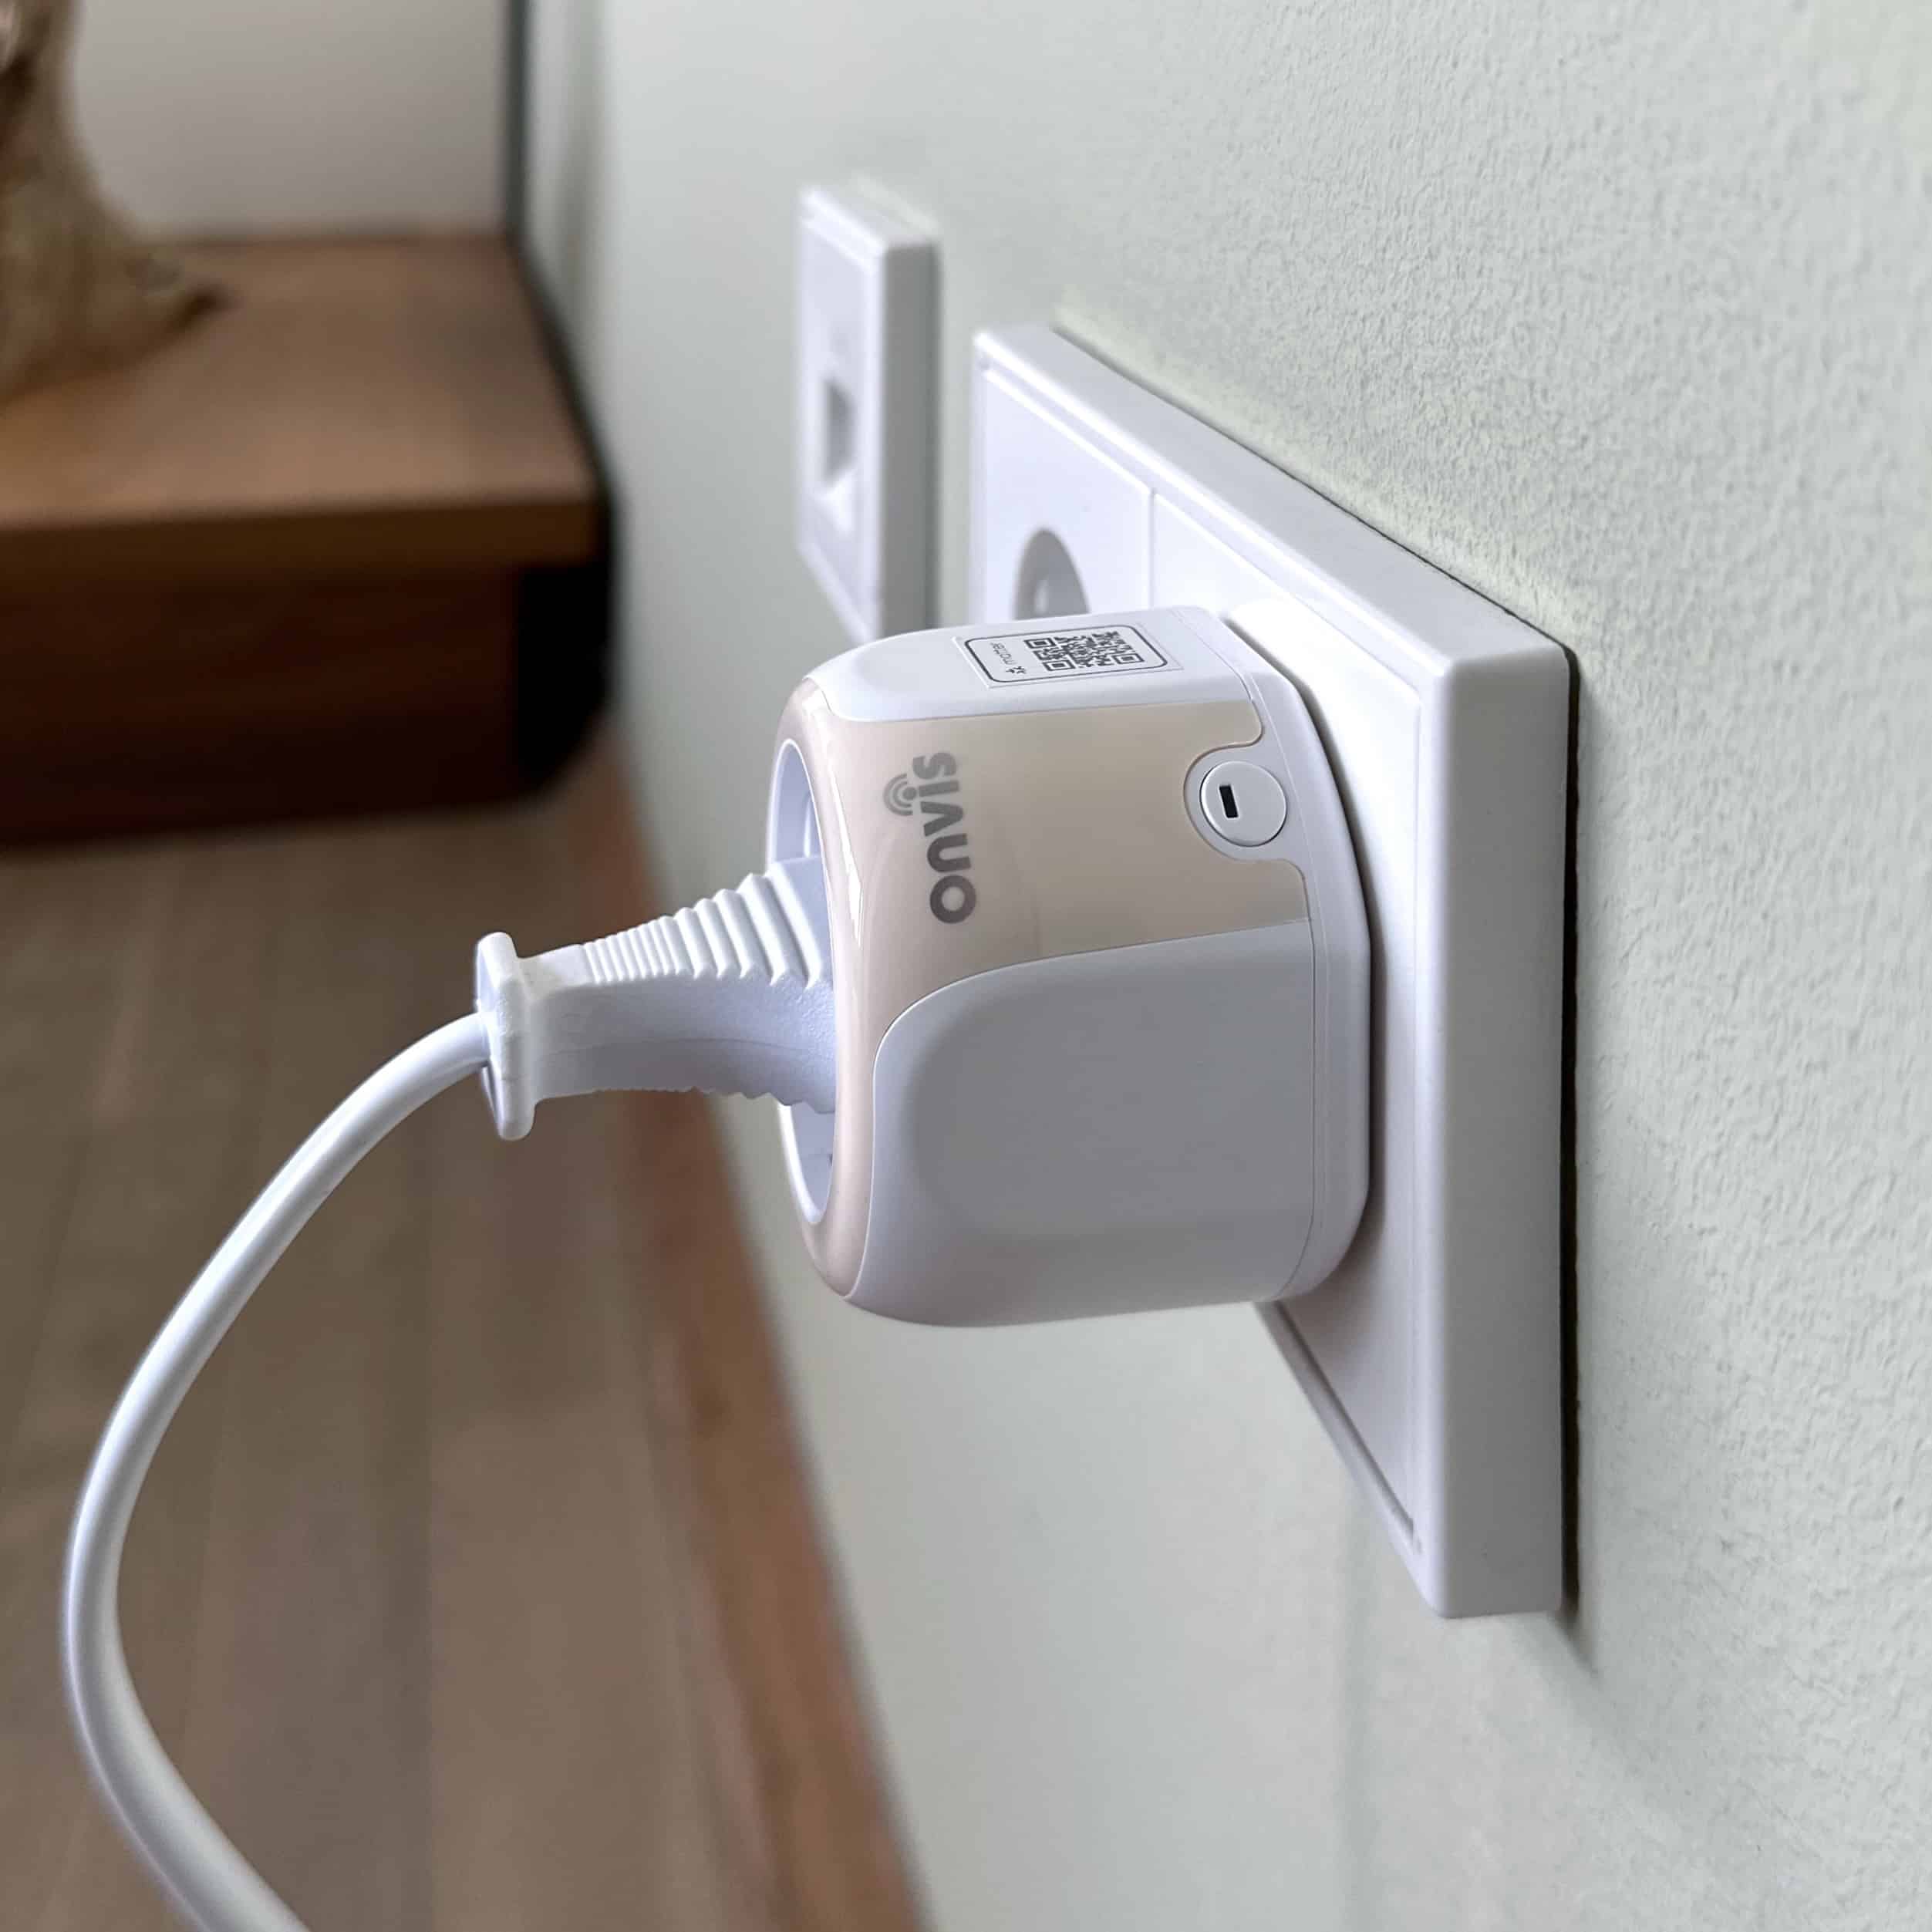 Now available: Onvis Thread / Matter Smart Plug